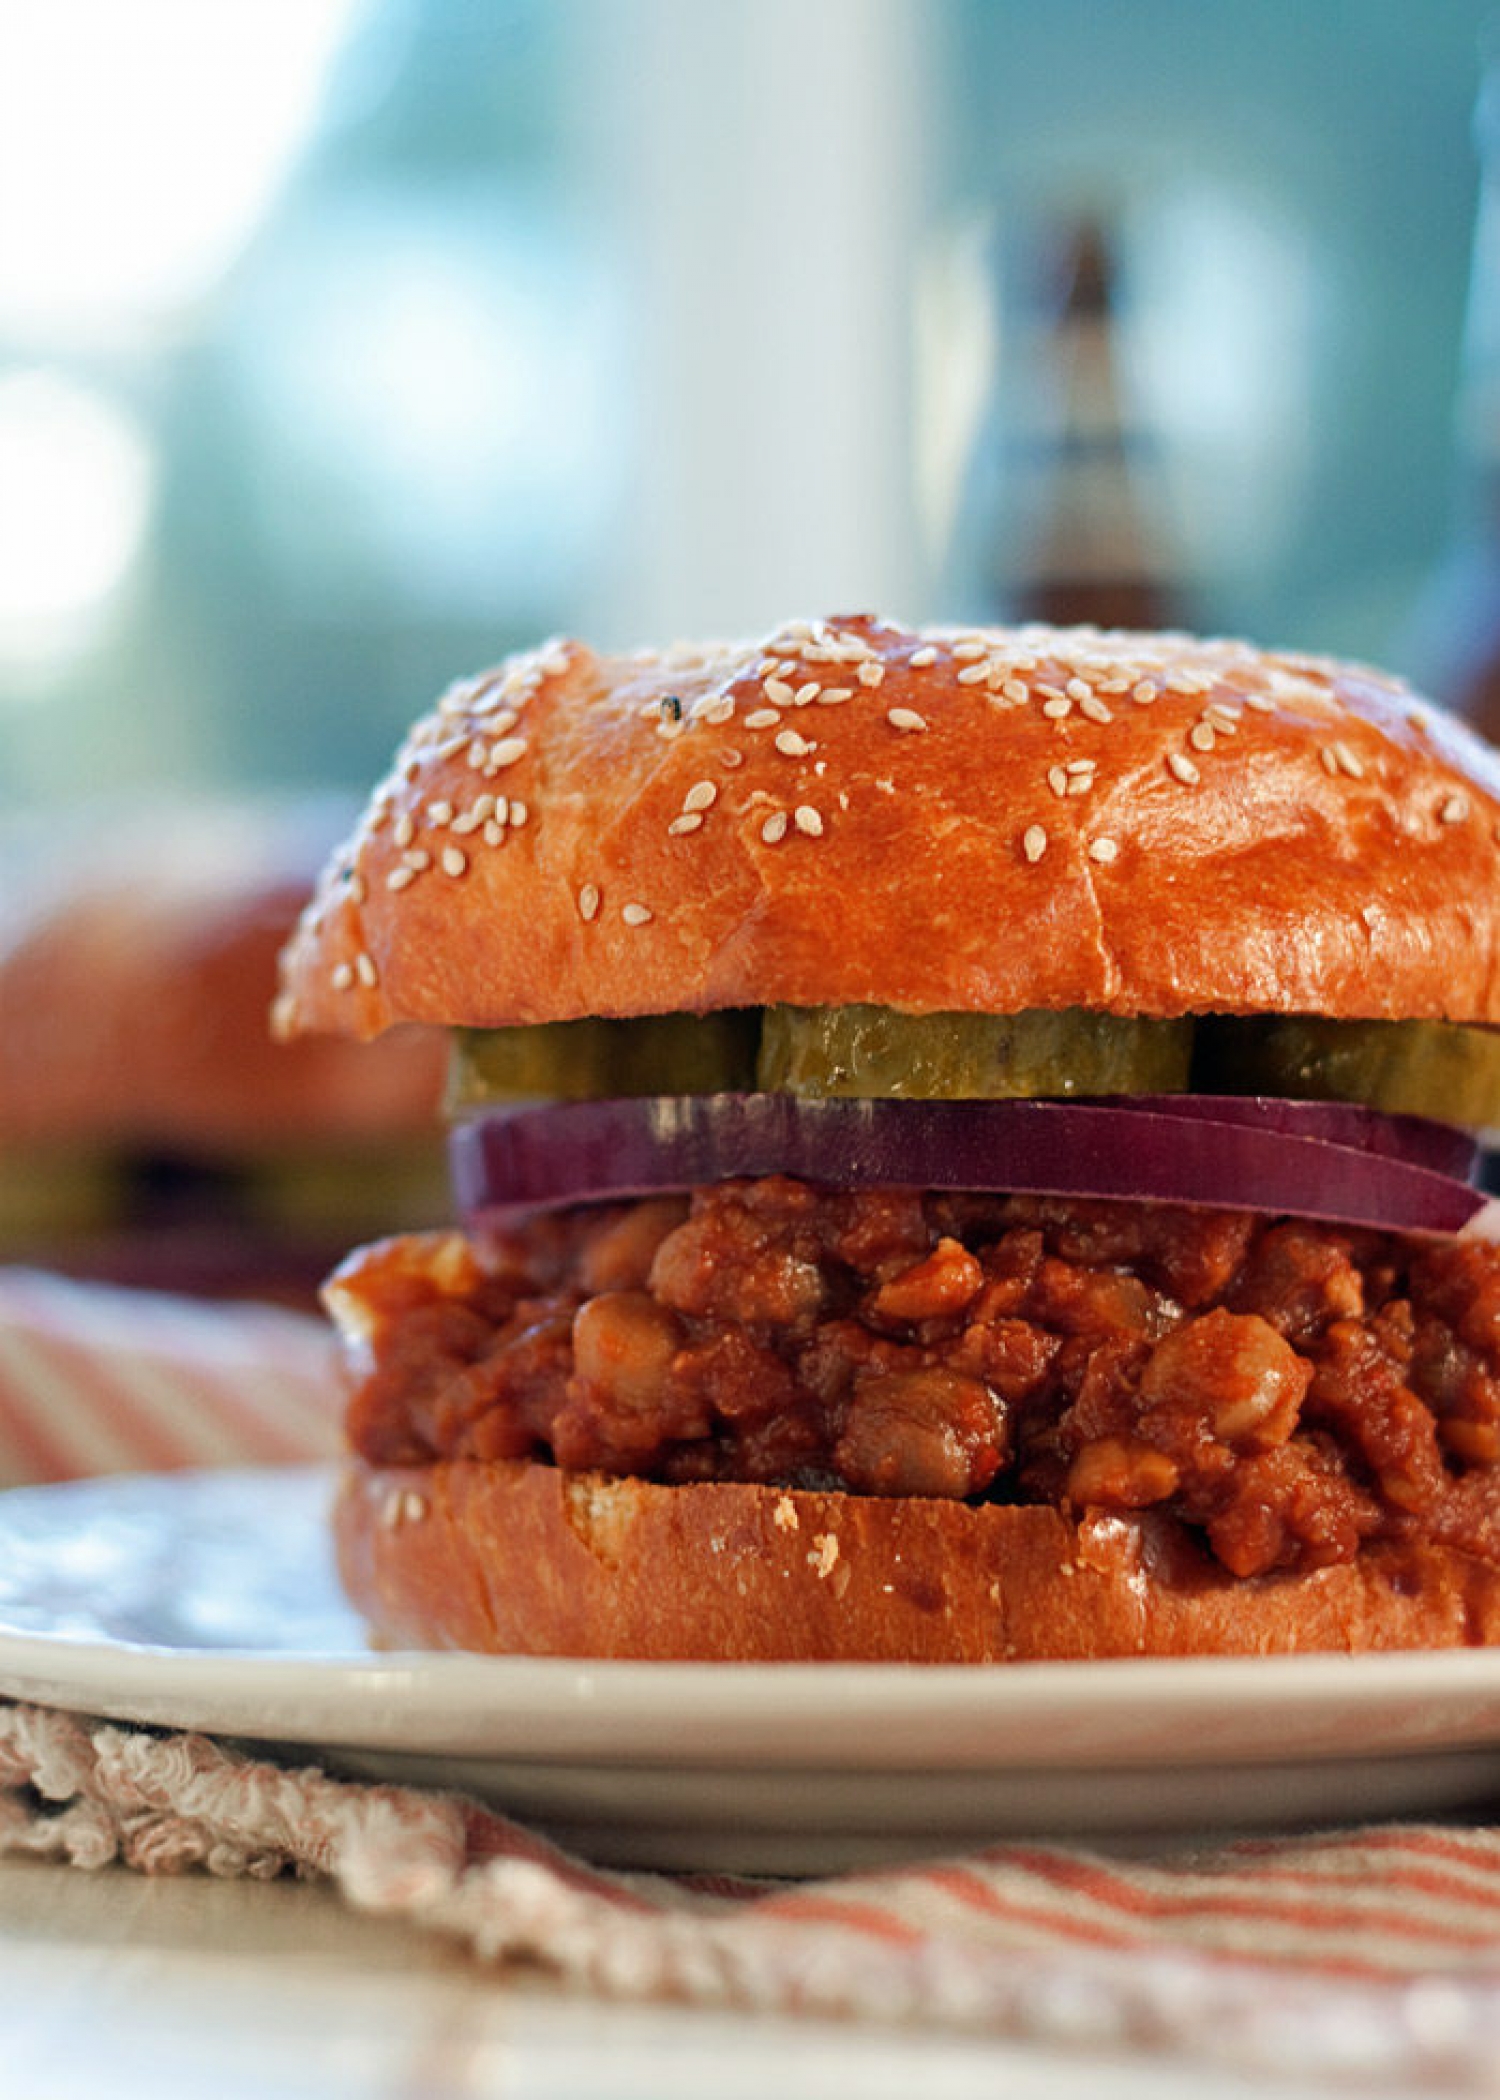 <p>These slow cooker BBQ chickpea sloppy joes are the vegan answer to a classic American comfort food. Bulked up even further with red lentils and slow cooked in a deeply flavorful tomato-BBQ sauce, they're easily on par with their meat-based cousins. <a href="https://www.kitchentreaty.com/slow-cooker-bbq-chickpea-vegan-sloppy-joes/" rel="noopener">Get the recipe here.</a></p>